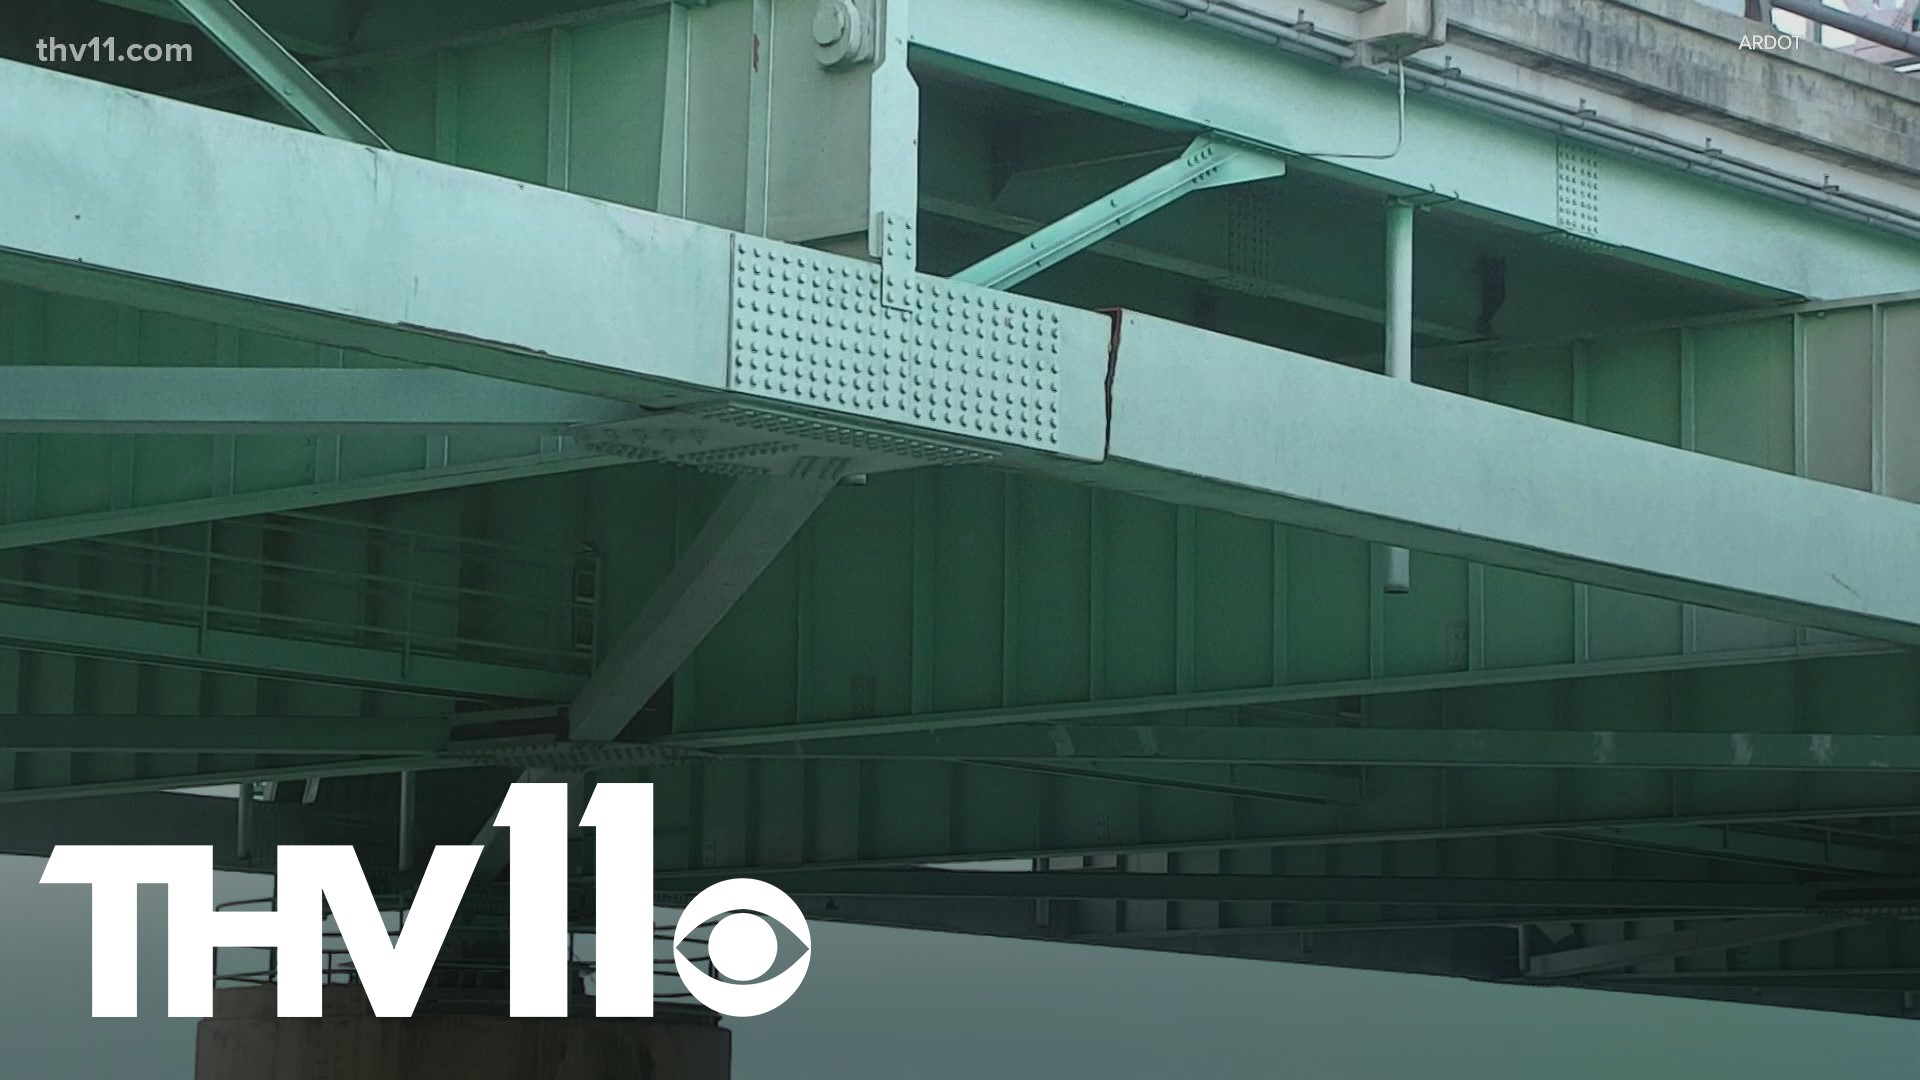 Both Arkansas and Tennessee's Department of Transportation are working to determine the next best step in repairing the bridge.